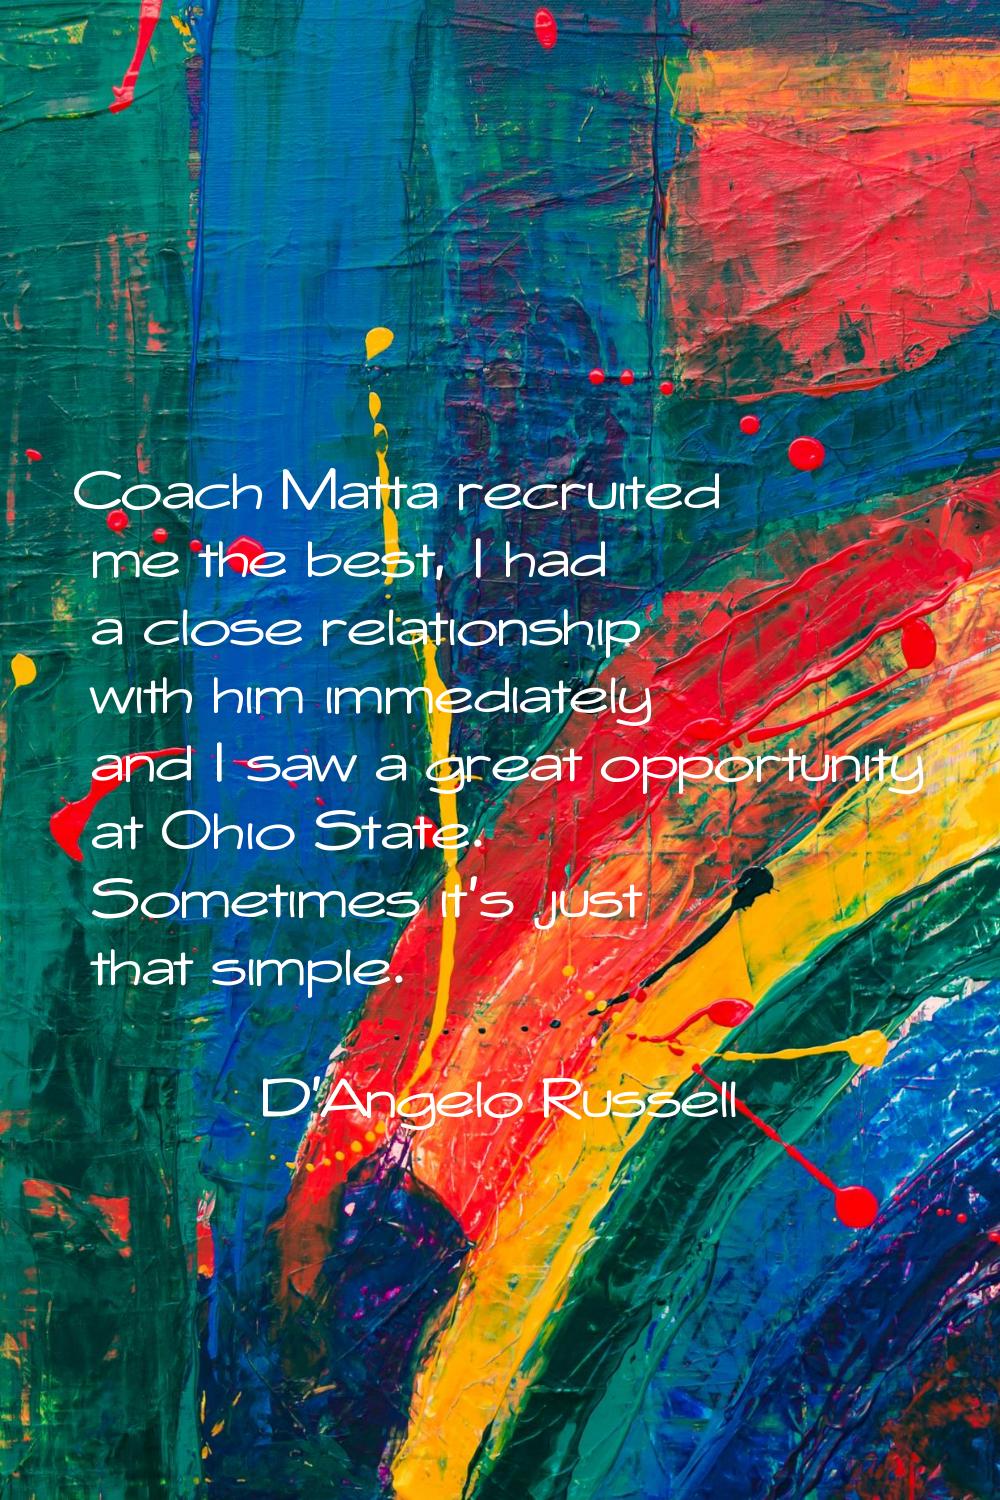 Coach Matta recruited me the best, I had a close relationship with him immediately and I saw a grea